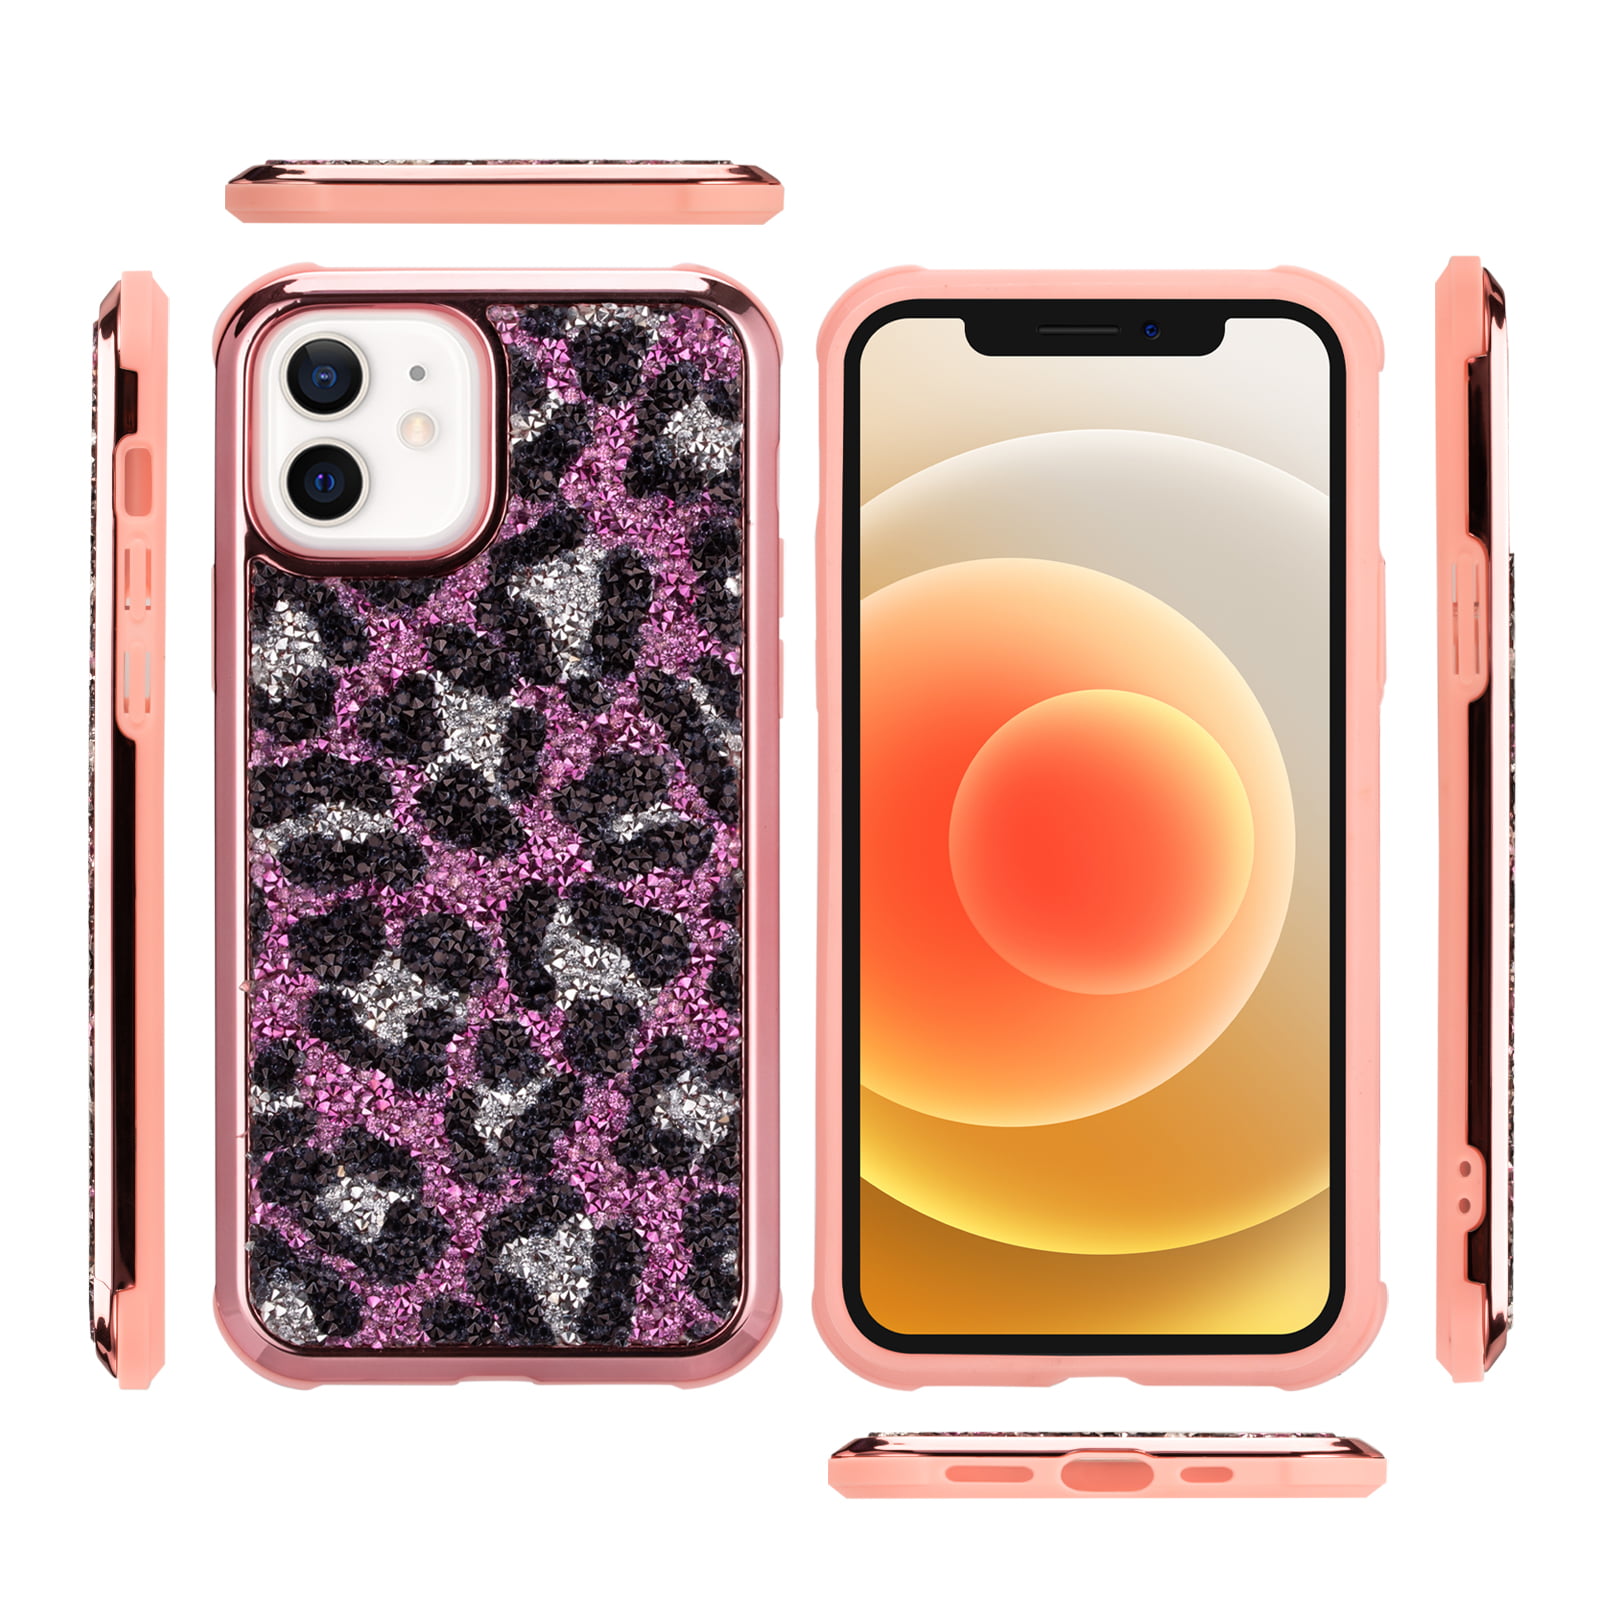 Allytech Designed for iPhone 11 Pro Max Case(6.5 inch 2019 